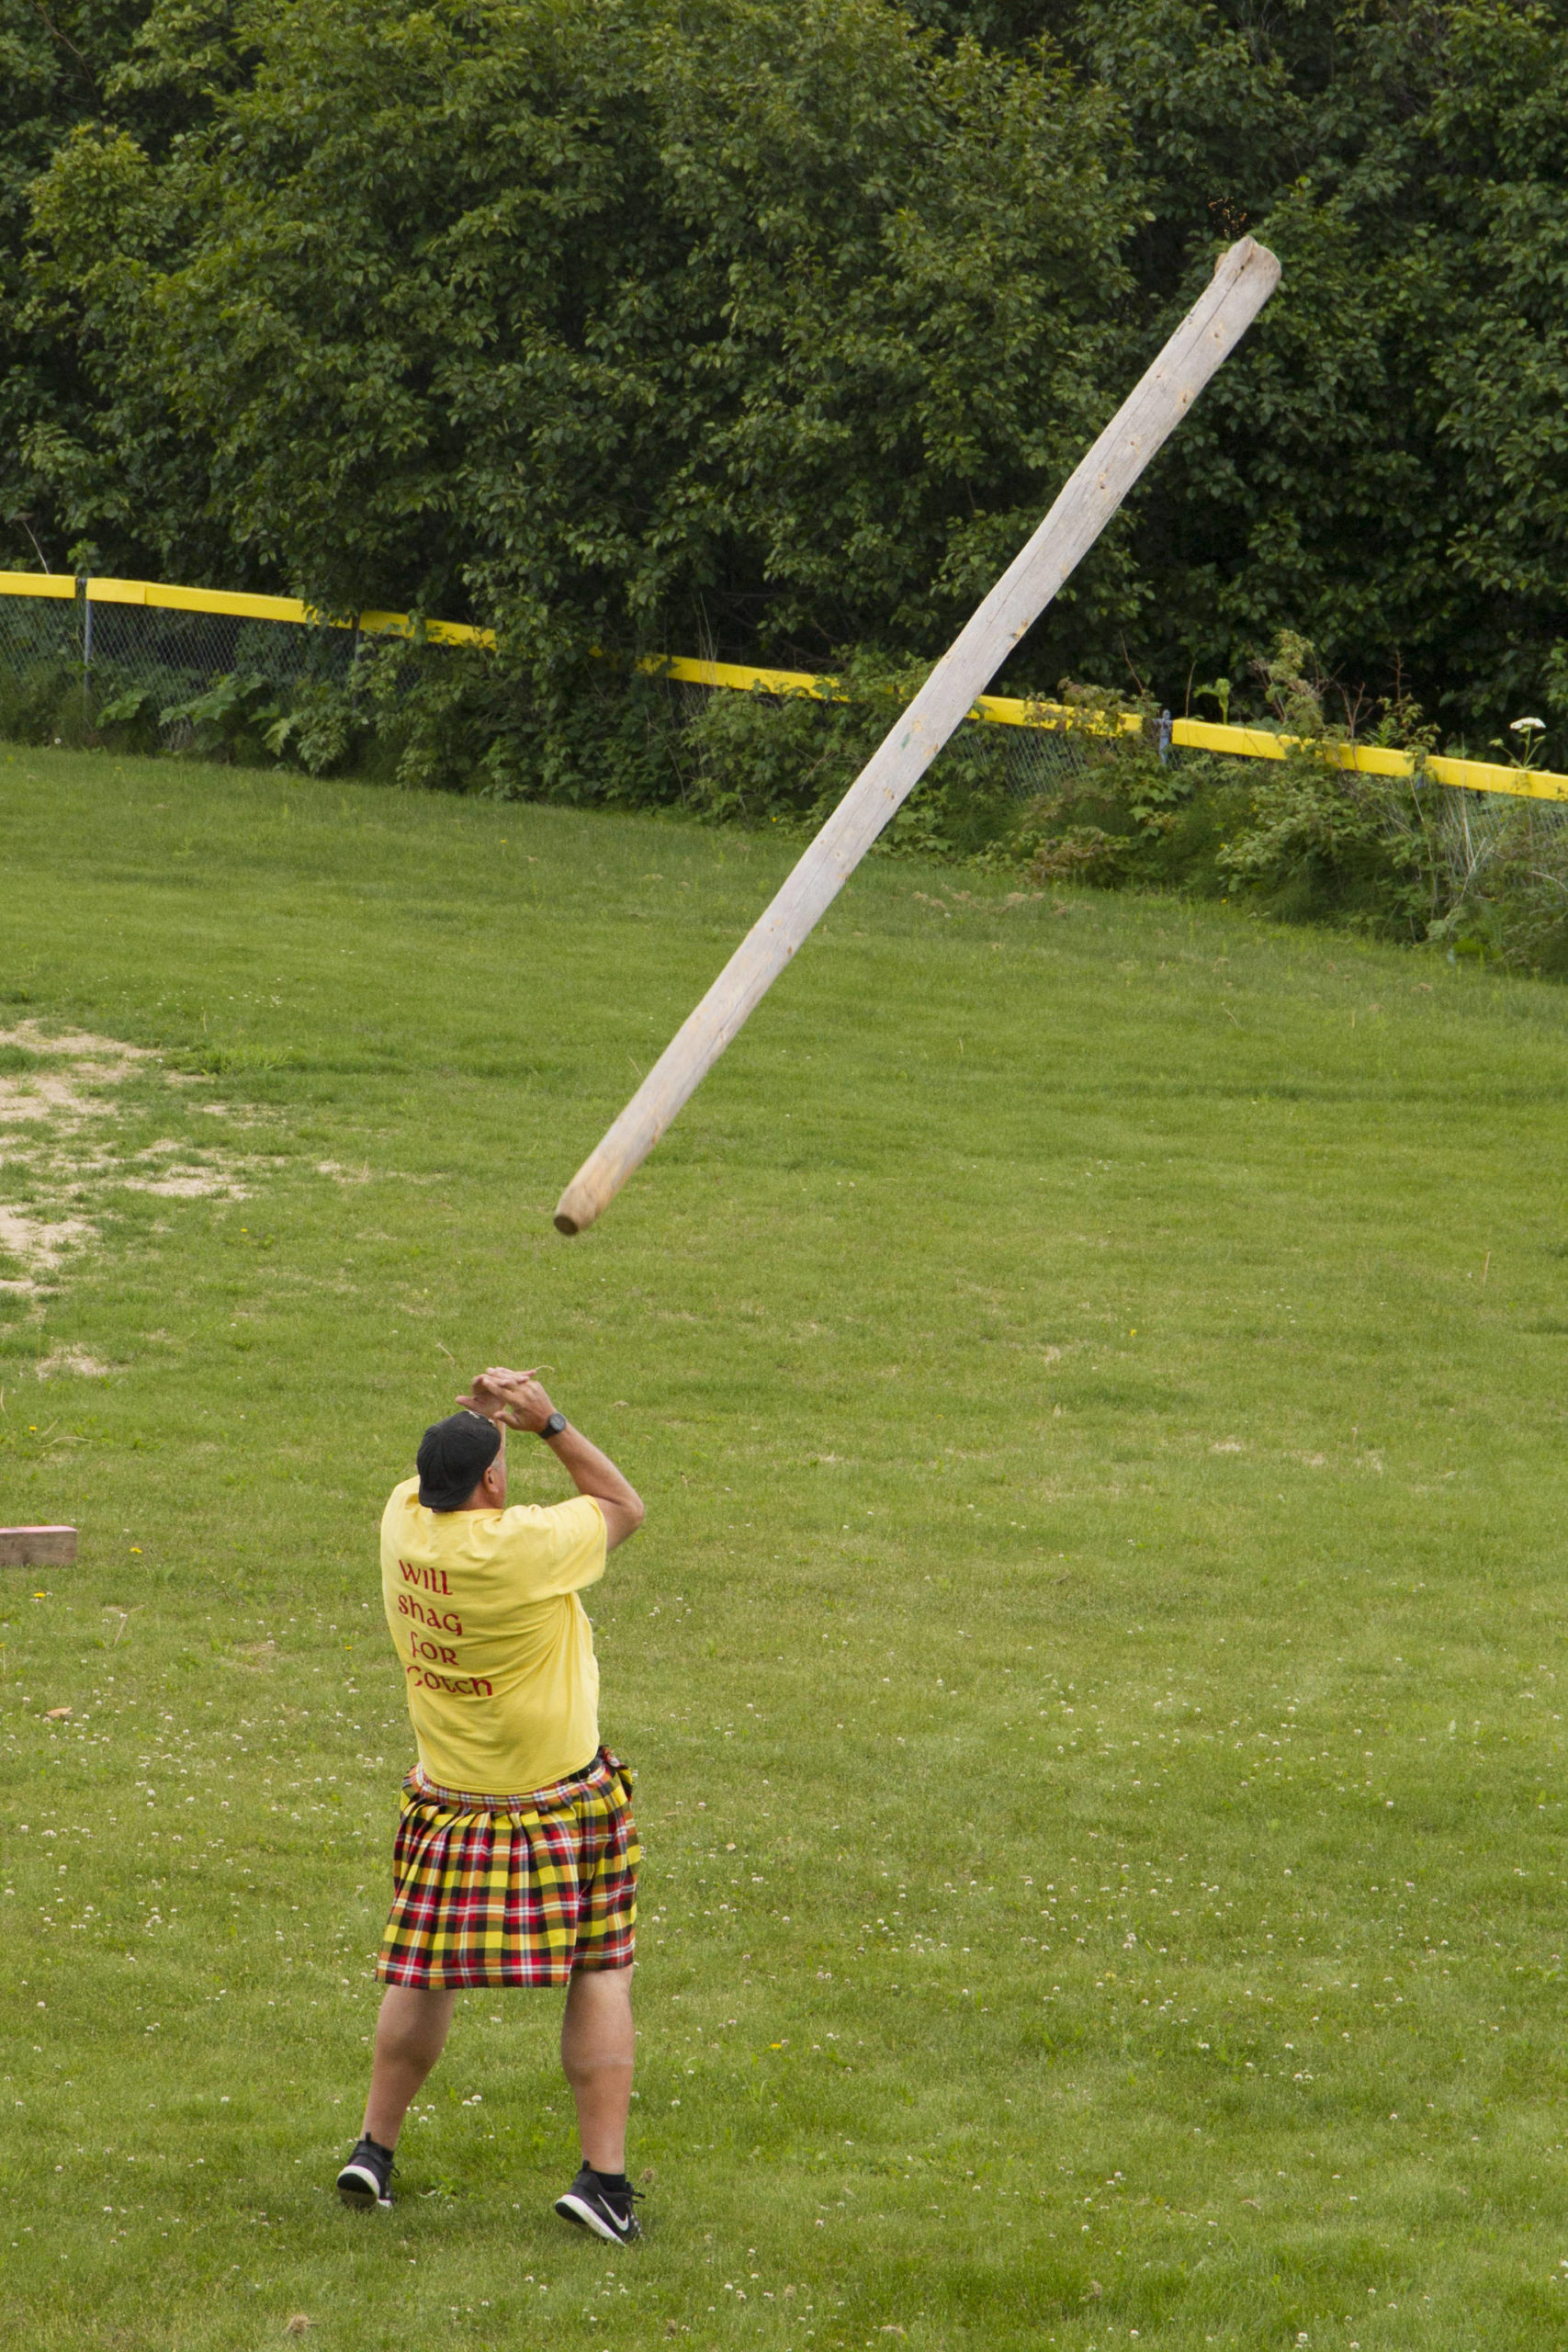 A competitor throws the caber during the caber toss at the 2021 Kachemak Bay Highland Games on Saturday, July 3. (Photo by Sarah Knapp/Homer News)